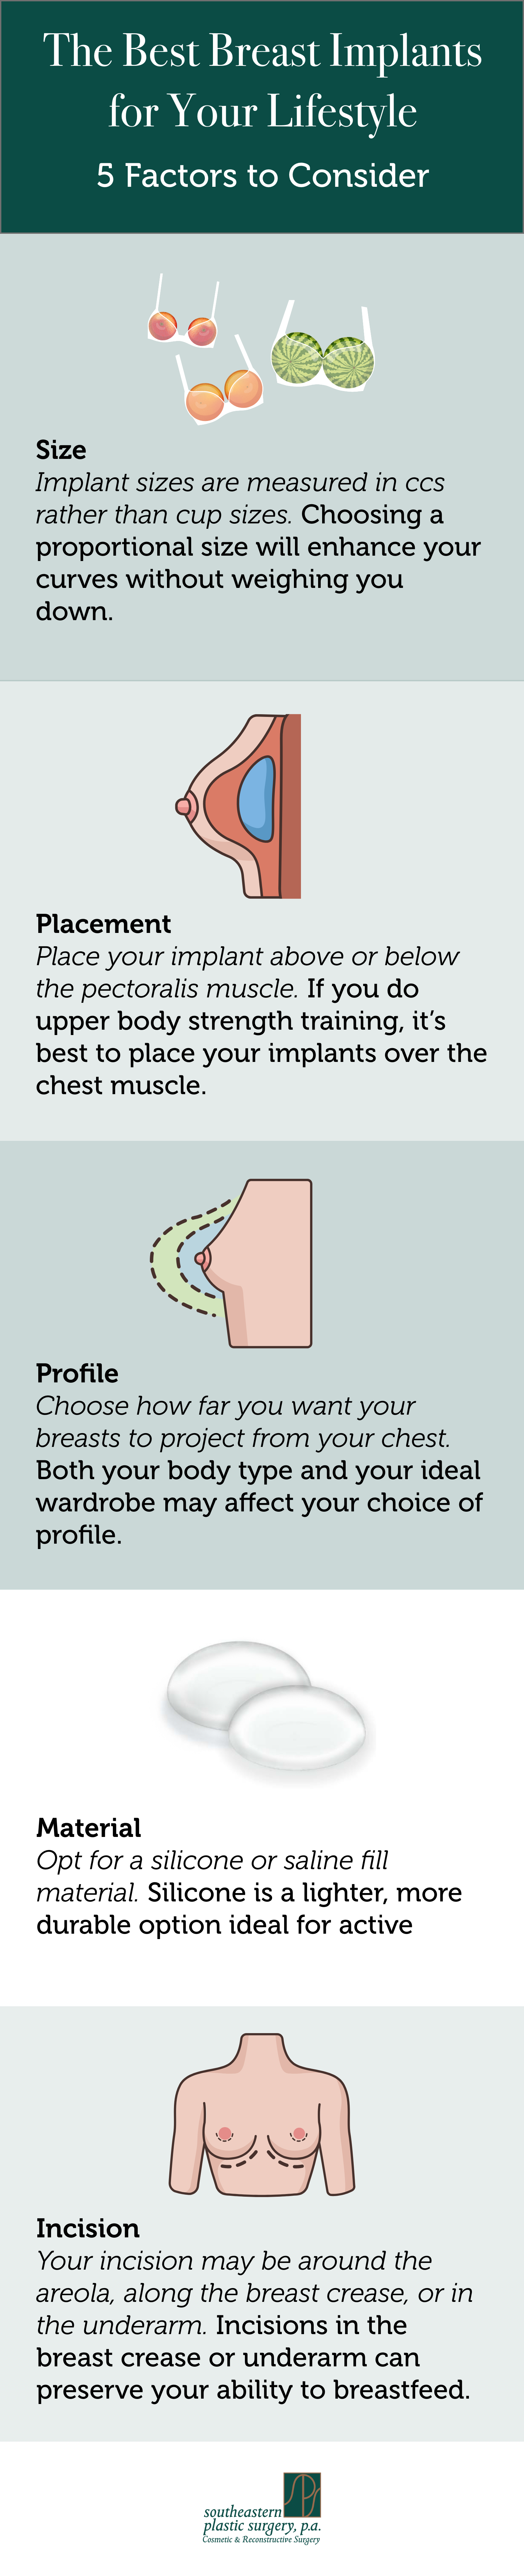 Best Breast Implants for Your Lifestyle in Tallahasse, FL.